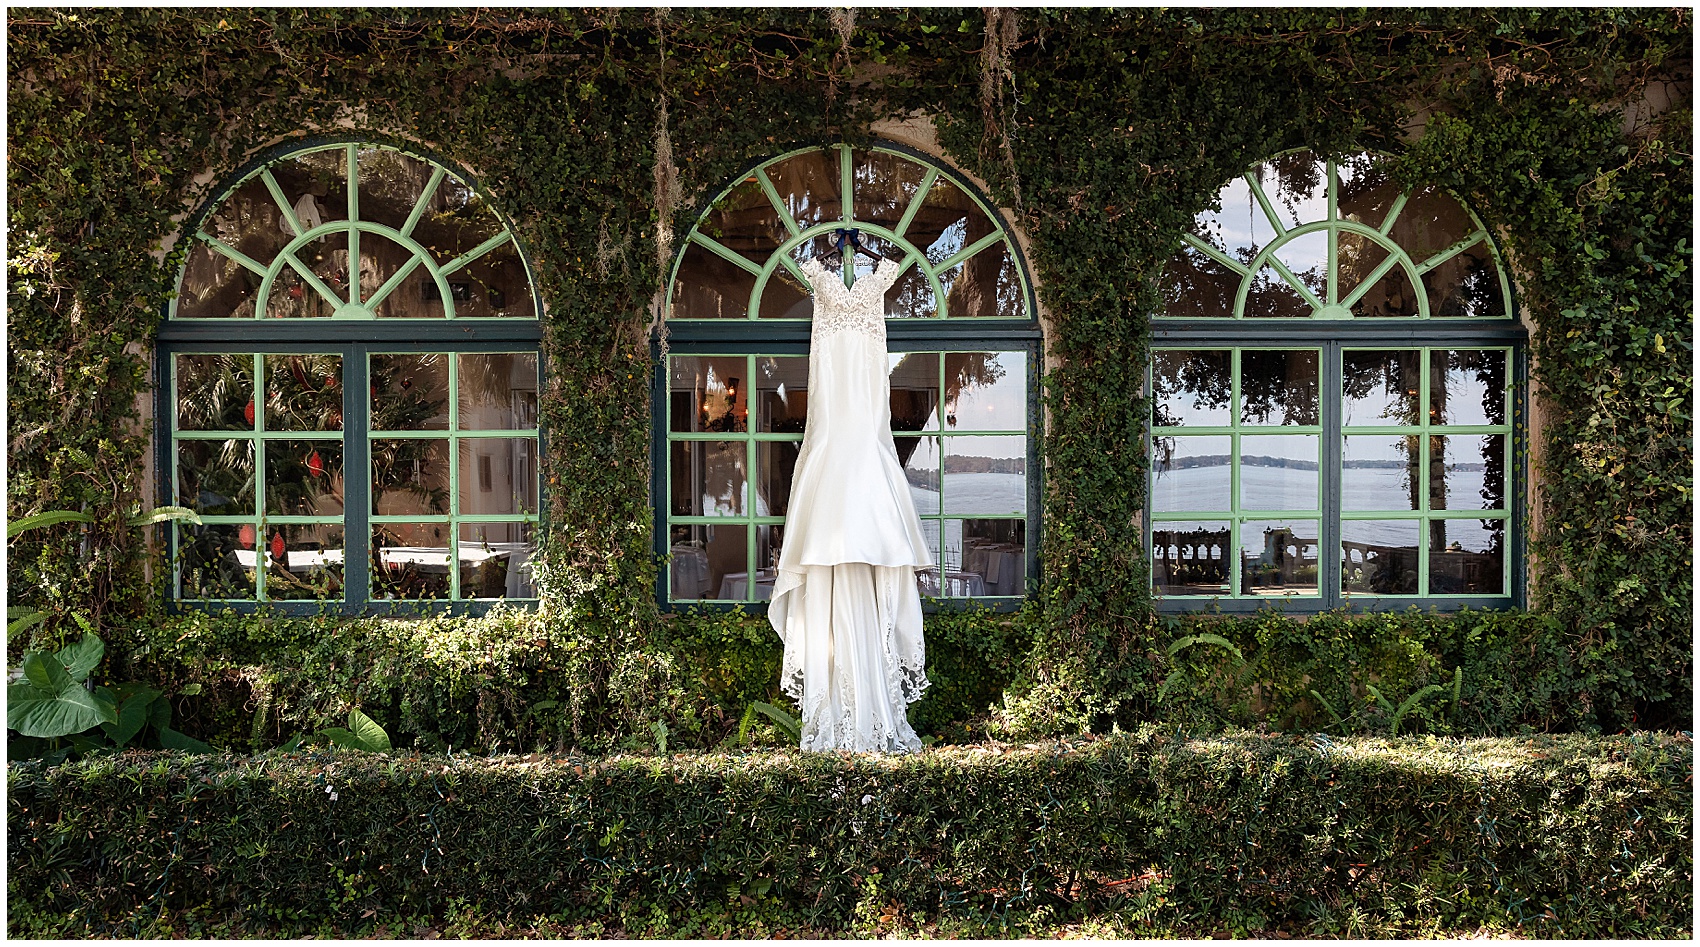 A wedding dress hangs from a large arched window on a wall covered in vines at the club continental wedding venue